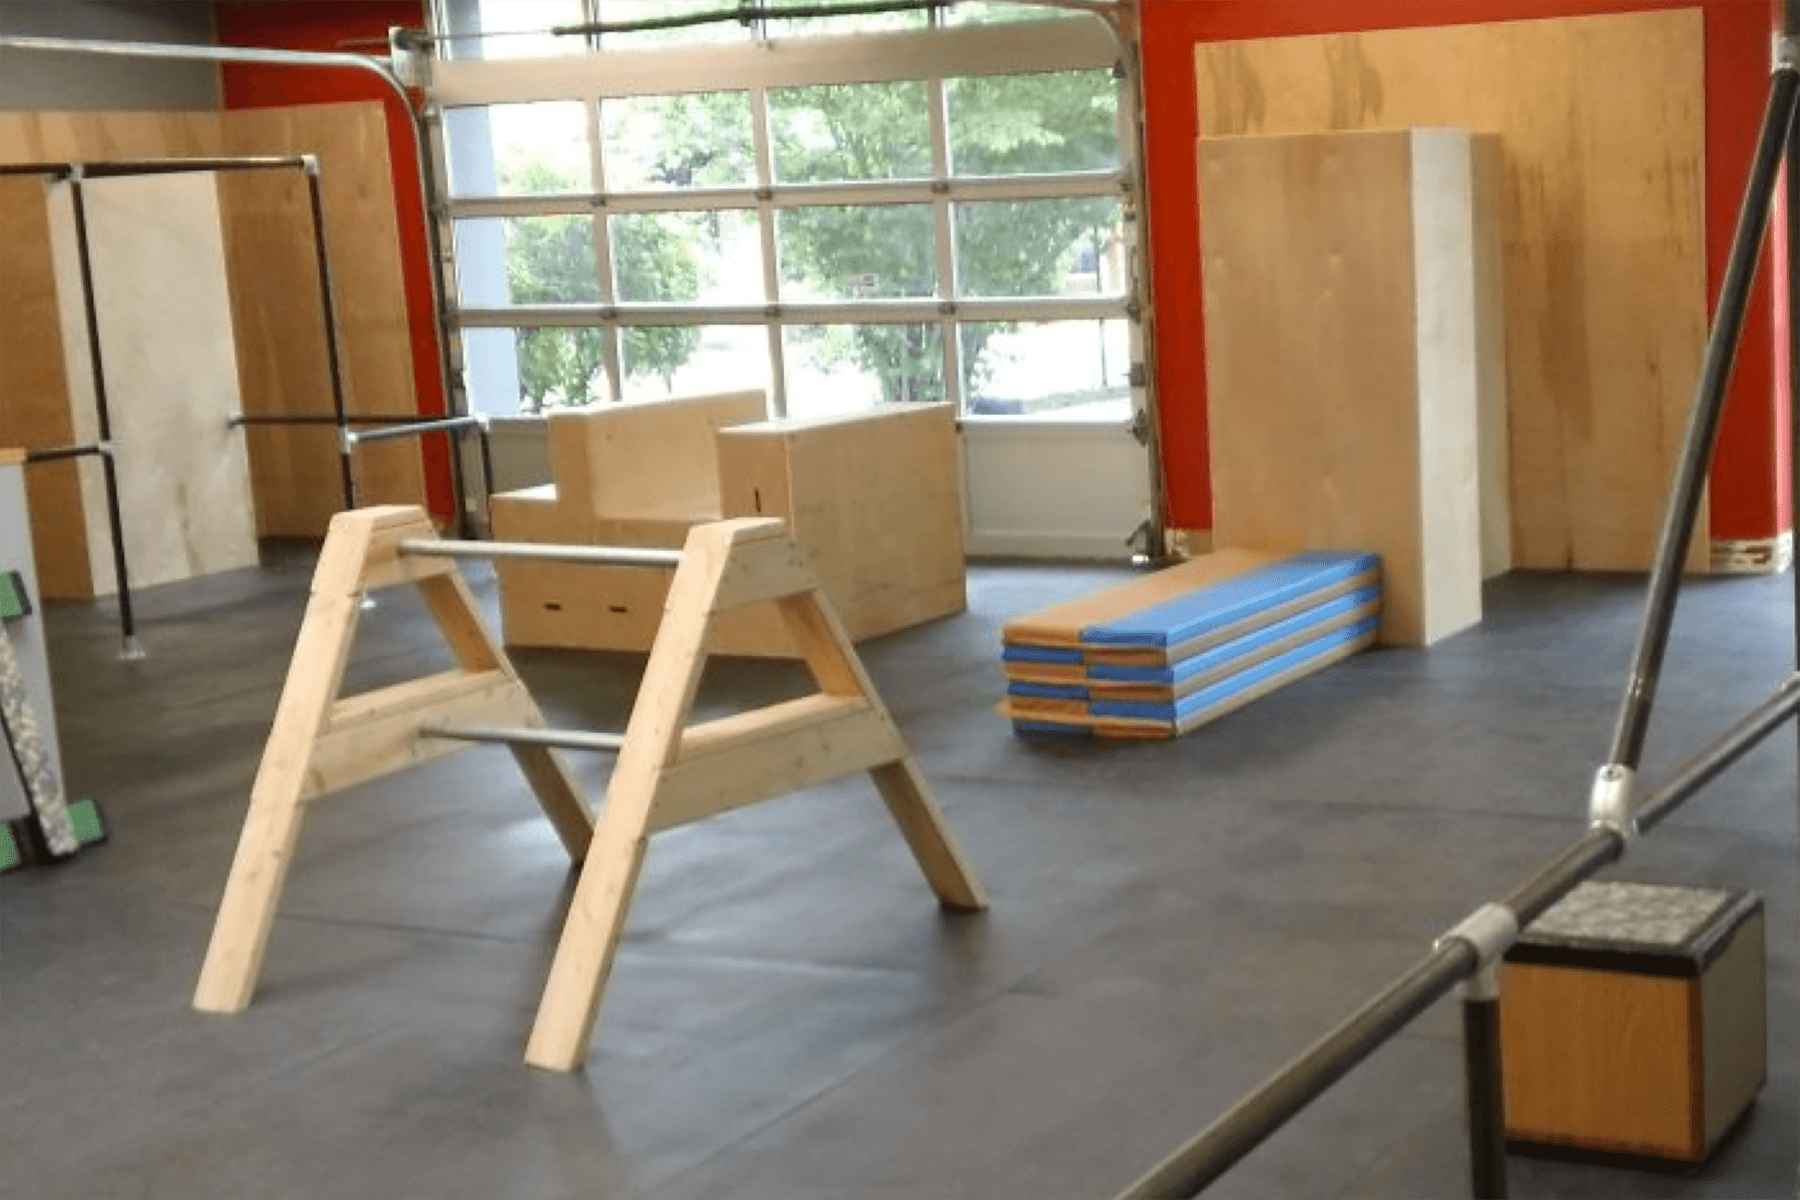 The Playground Gym in North Portland